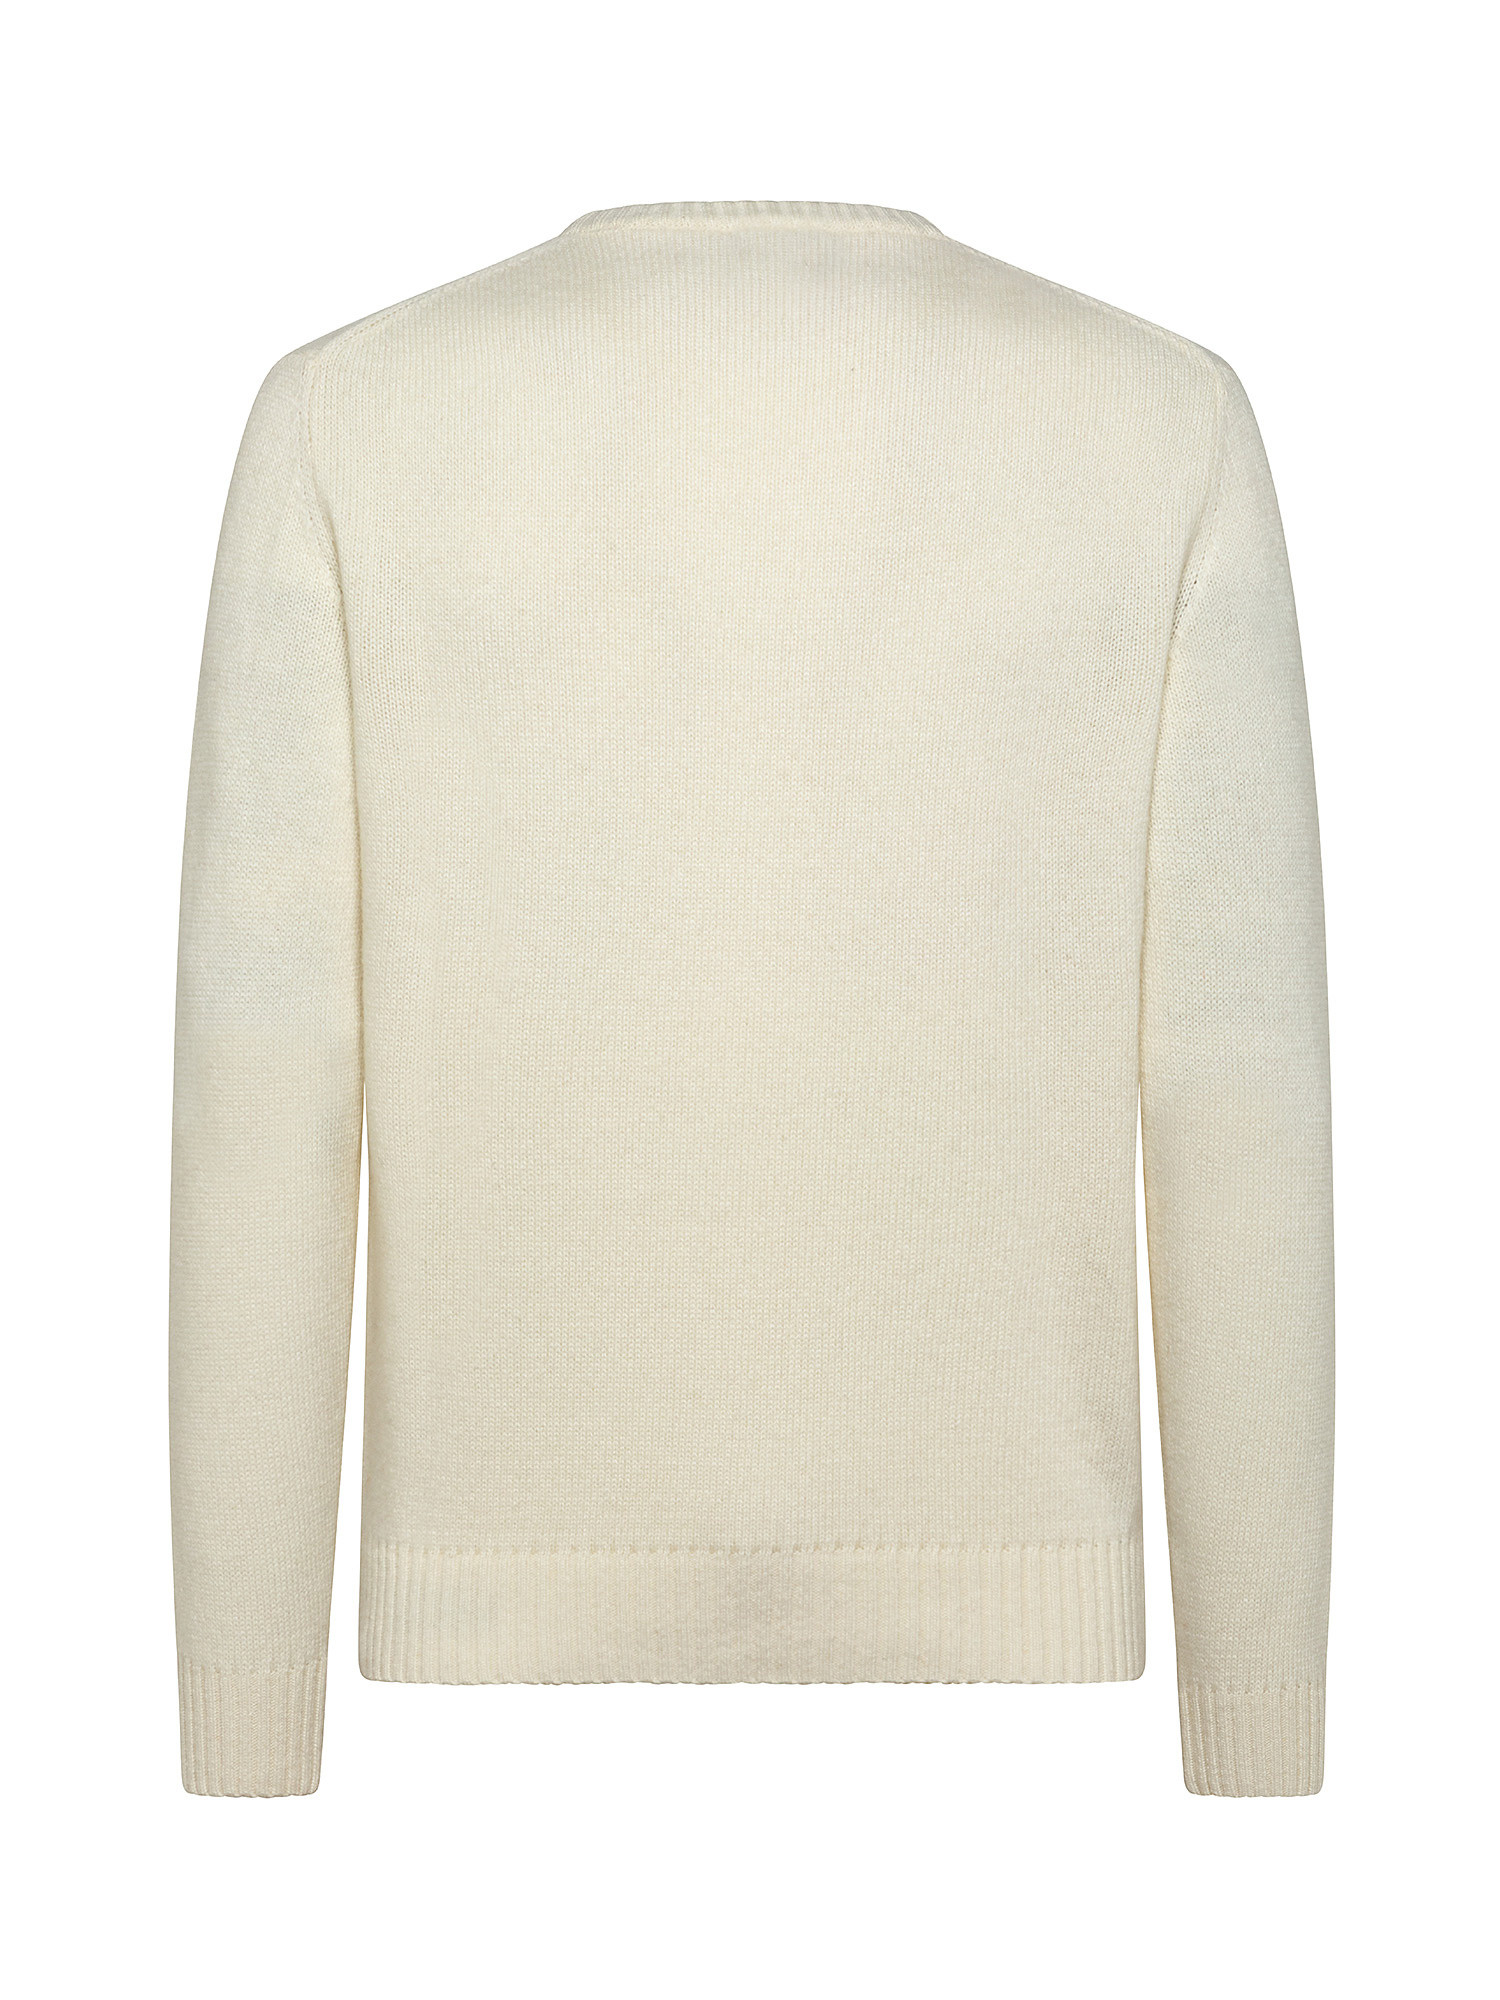 Crewneck sweater with noble fibers, White Cream, large image number 1